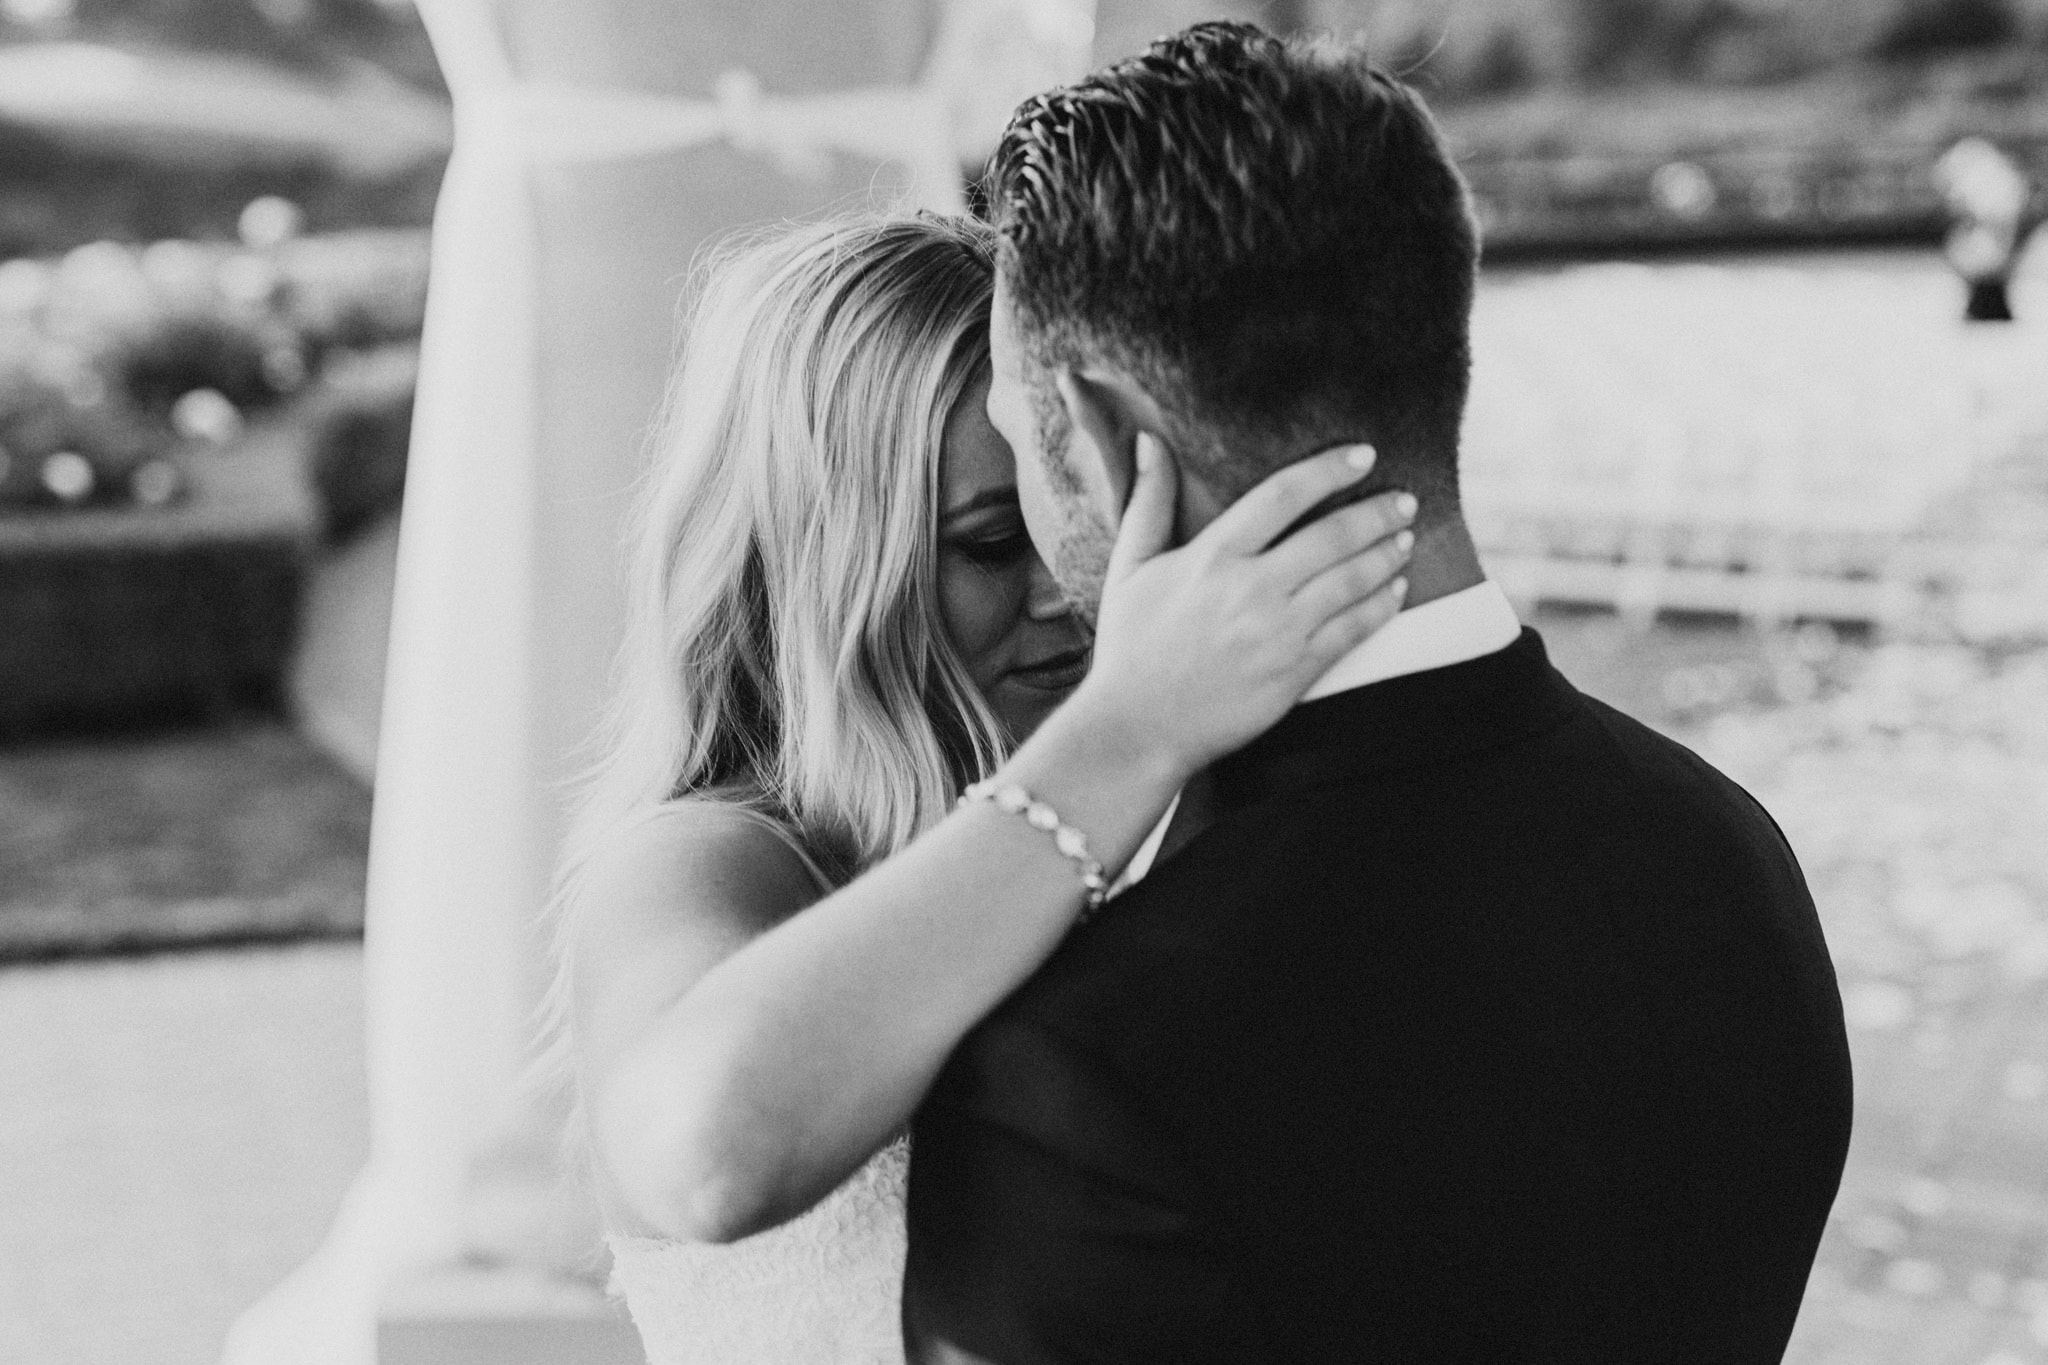 A bride and groom share an emotional and intimate moment while dancing at their Pelican Hill Resort wedding.